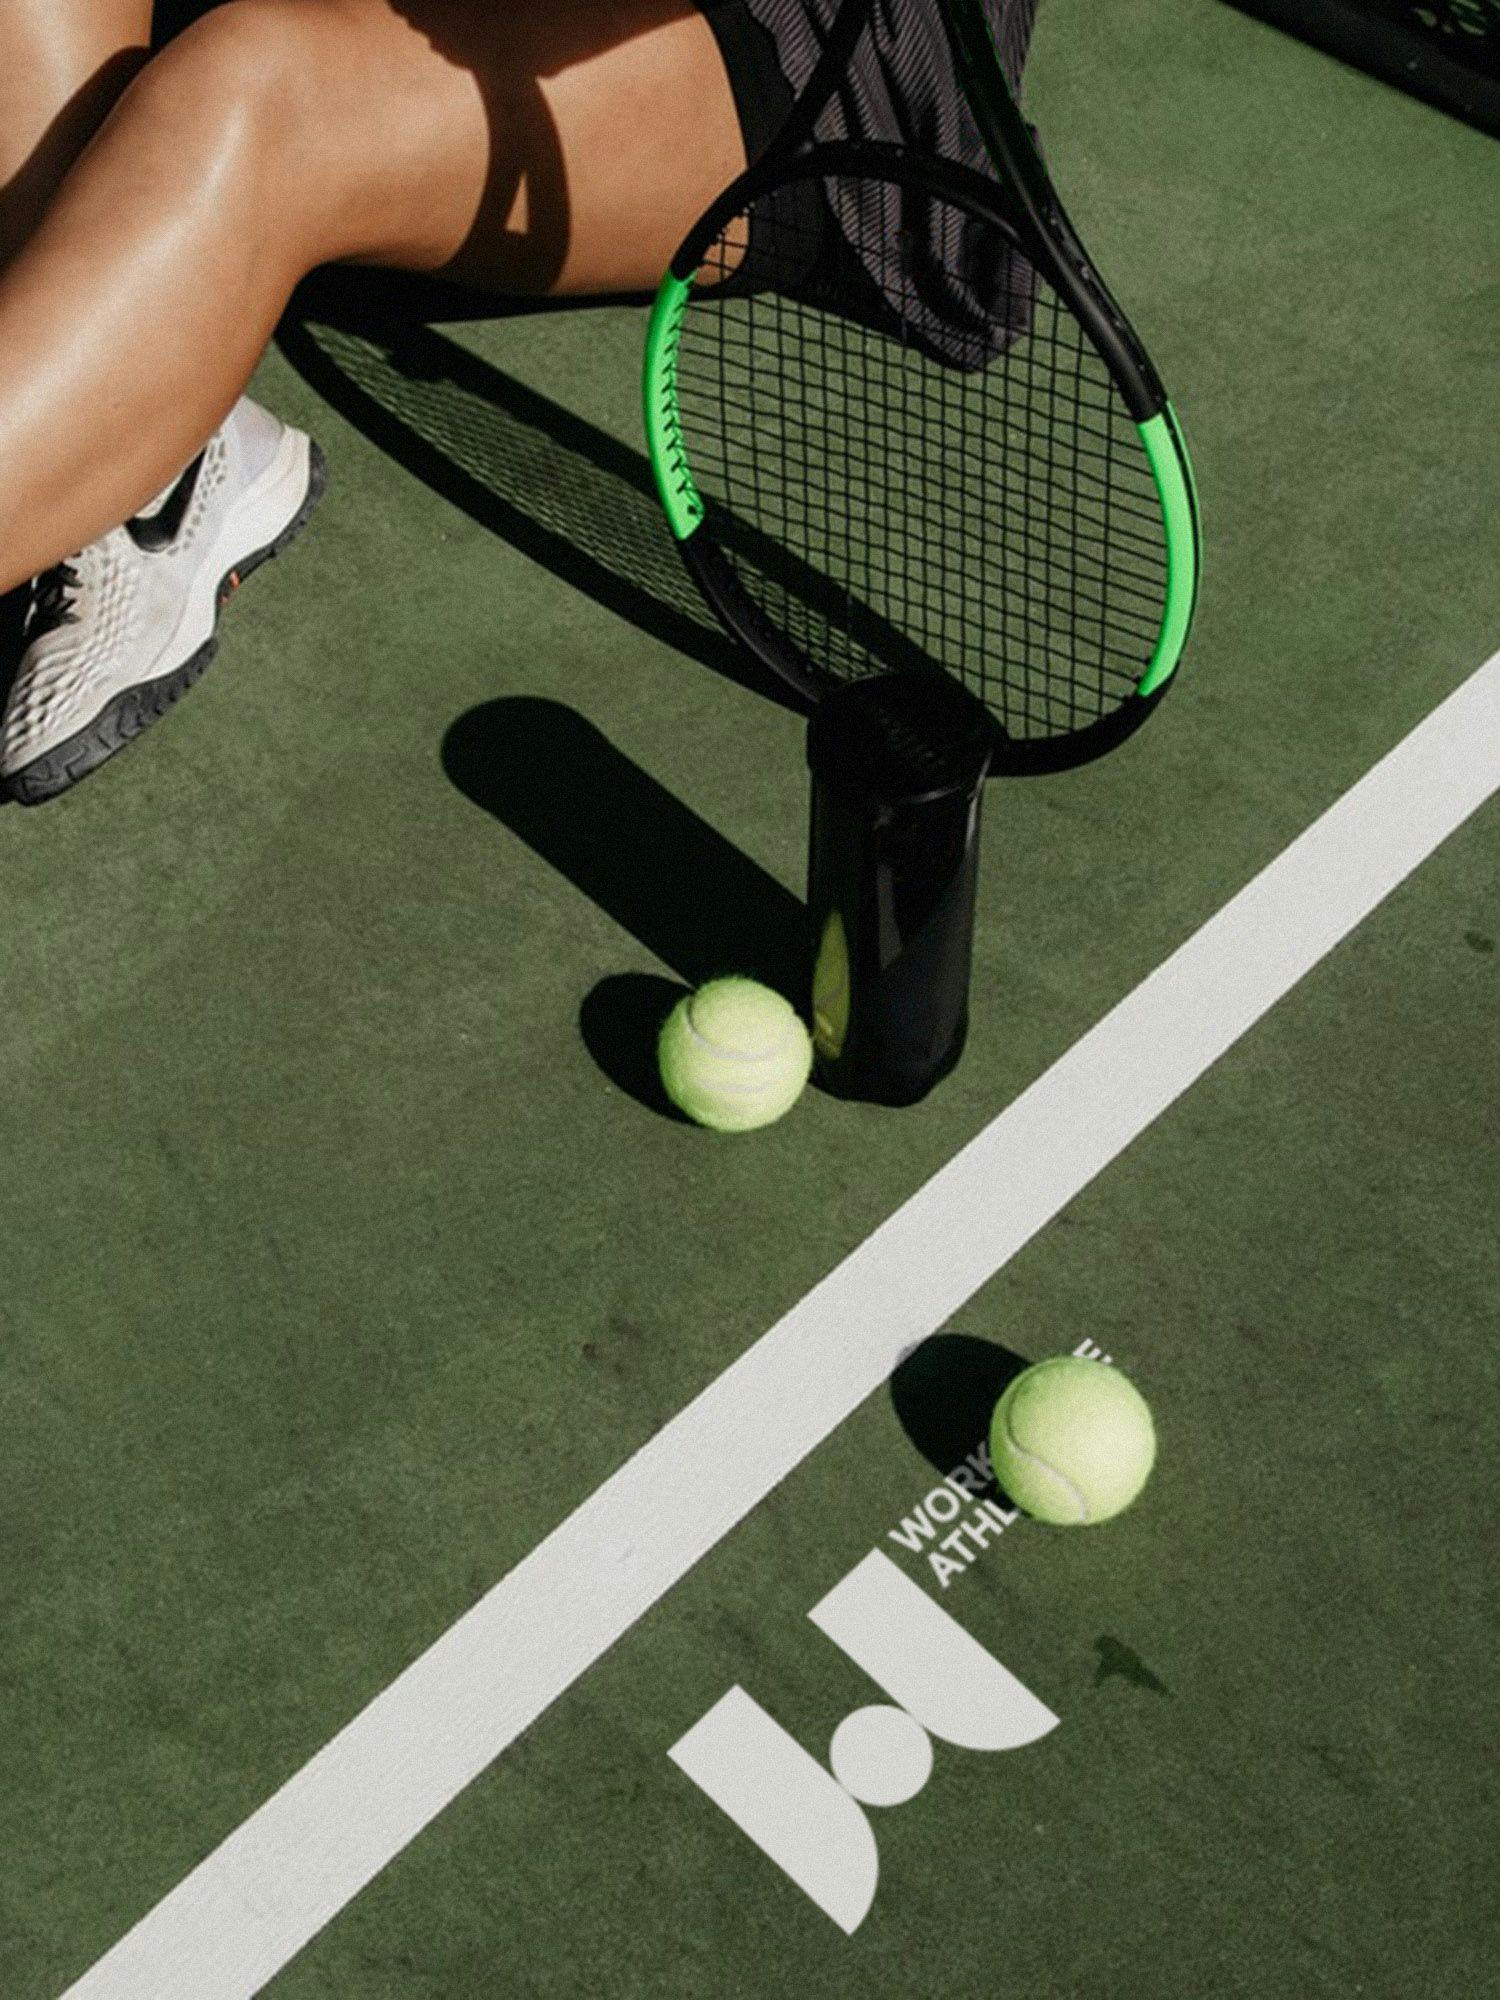 A tennis player with racquets and tennis balls